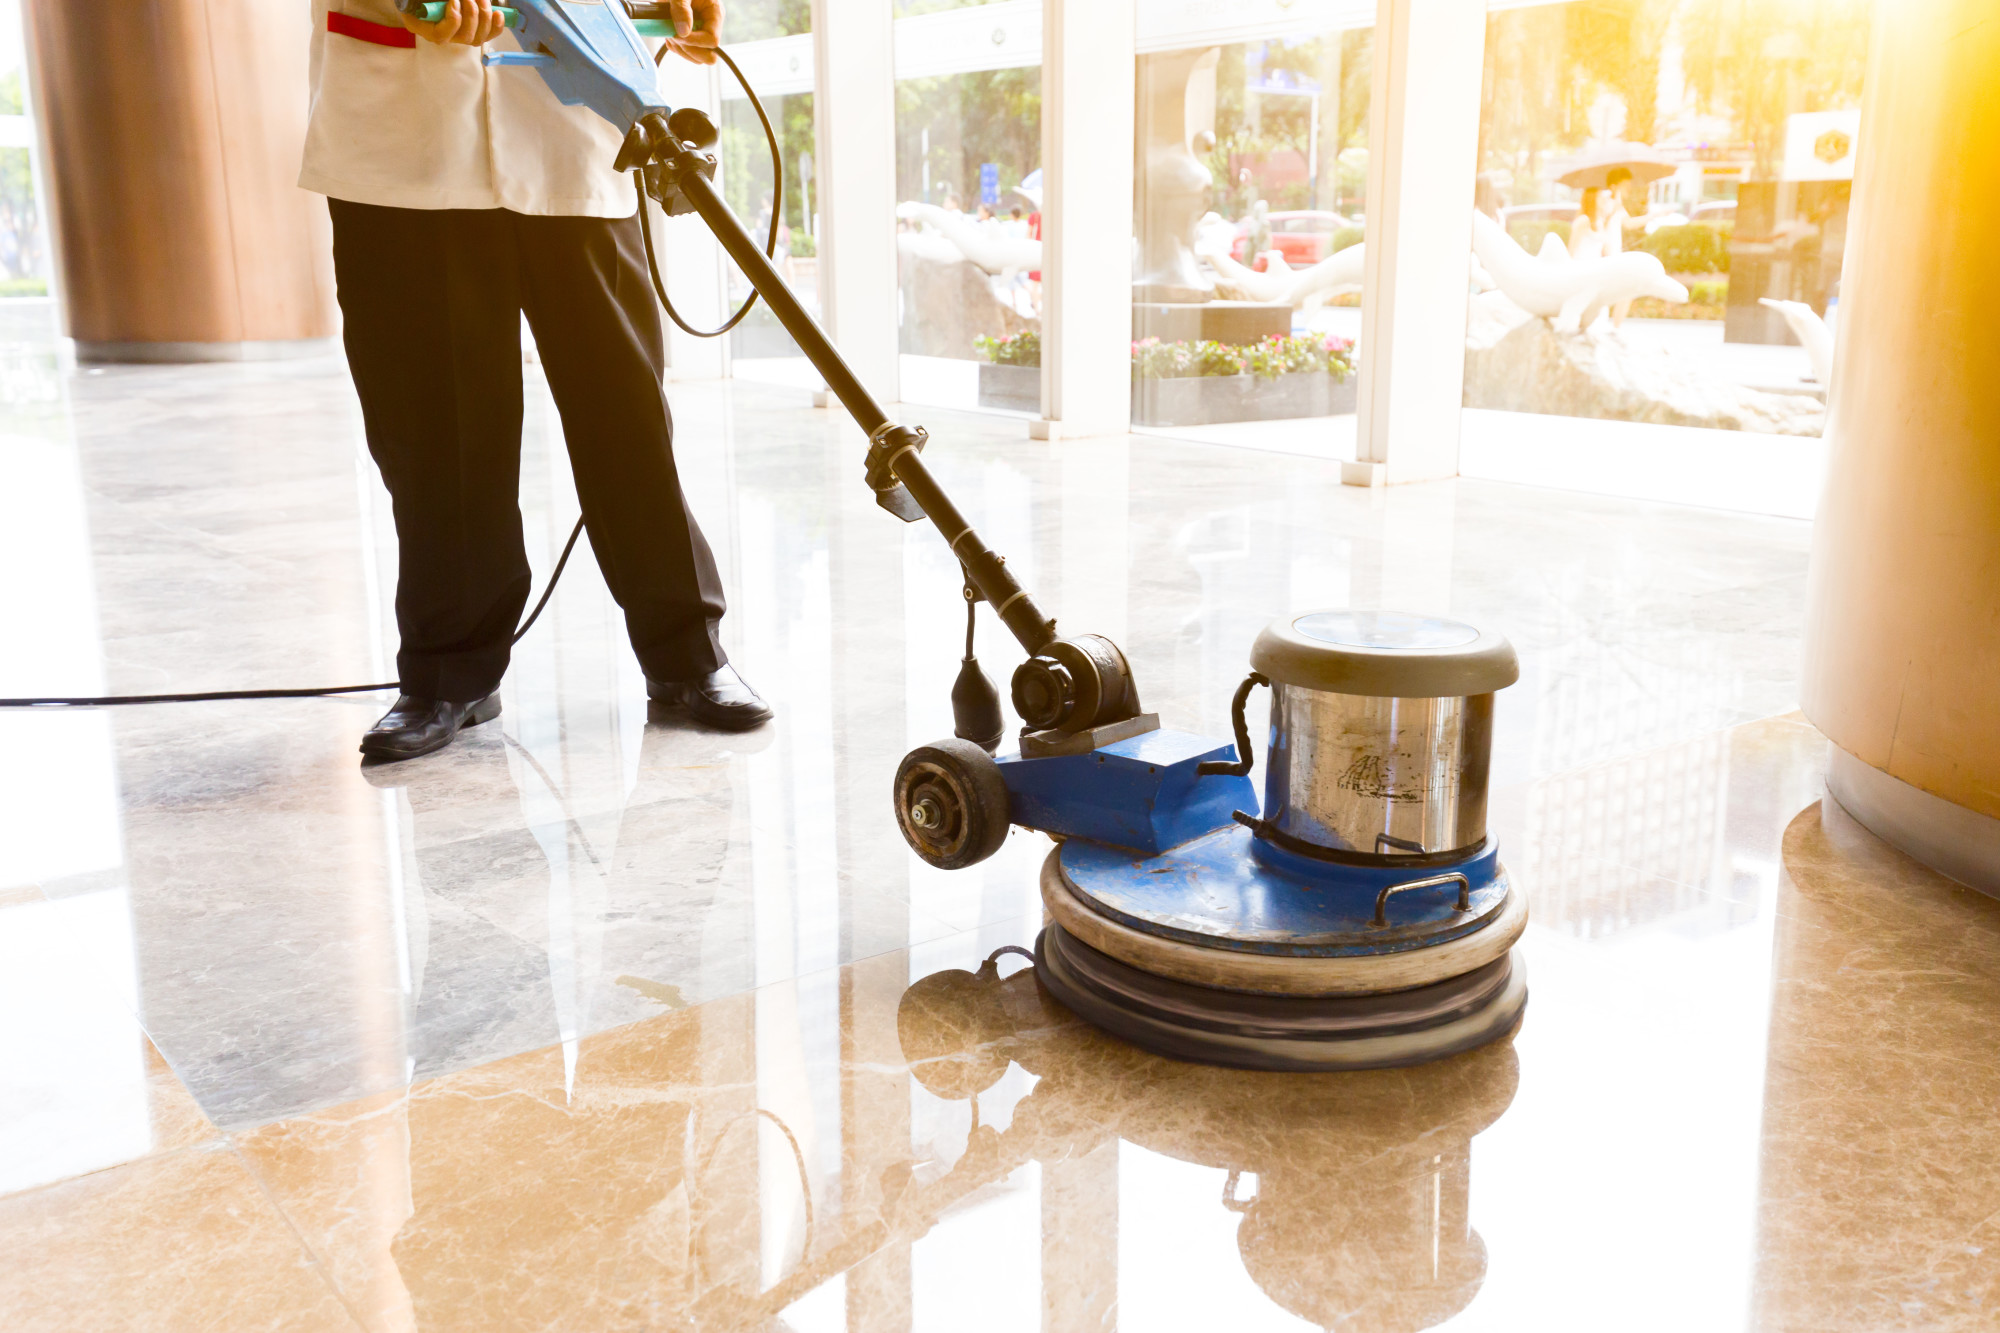 Ask These Questions While Hiring Any Janitorial Service